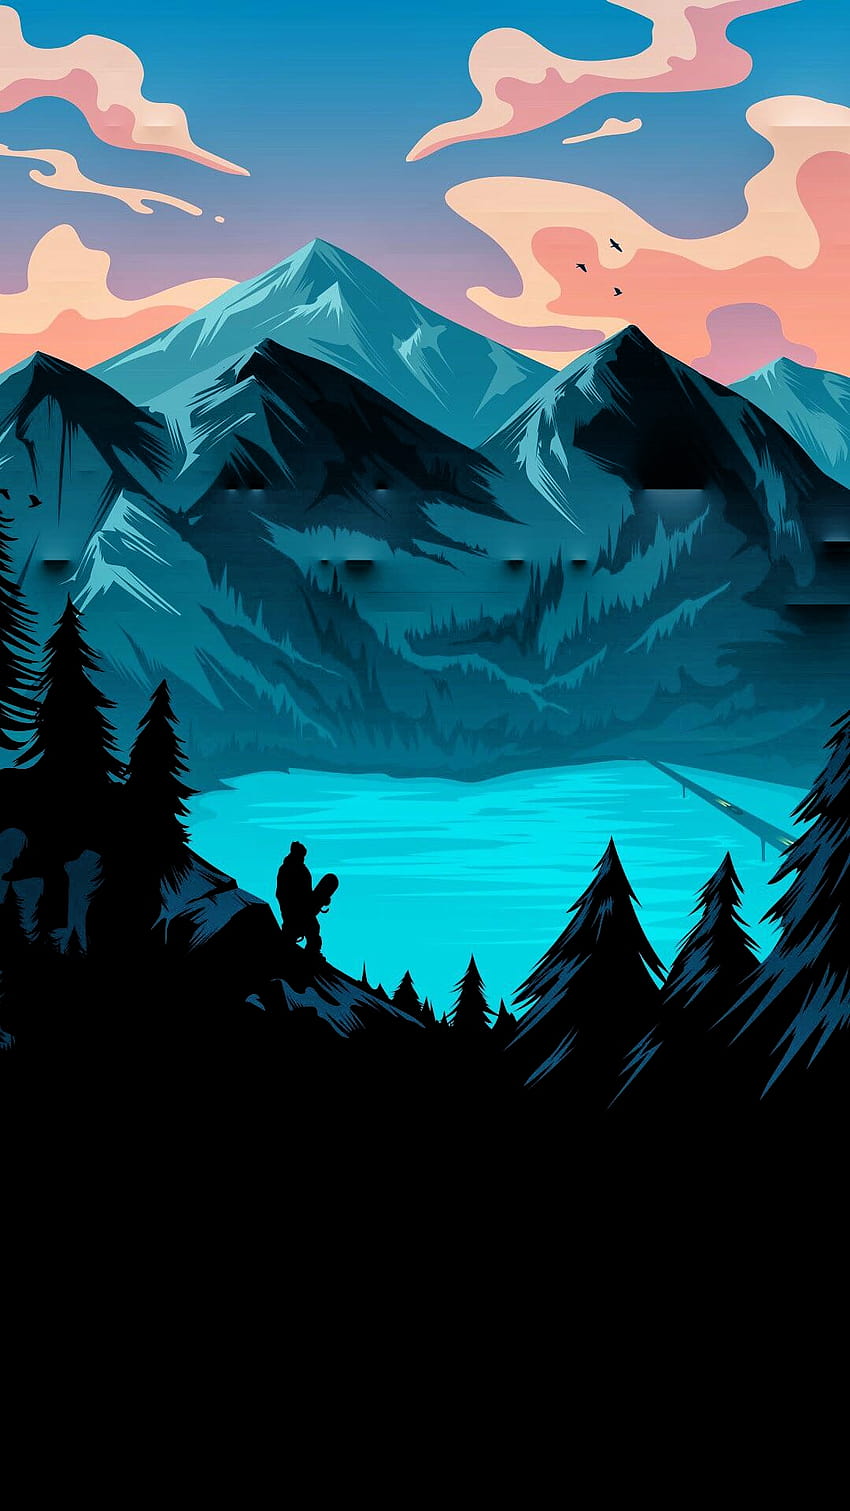 Amoled 1440p posted by Ryan Walker, amoled mountains HD phone wallpaper